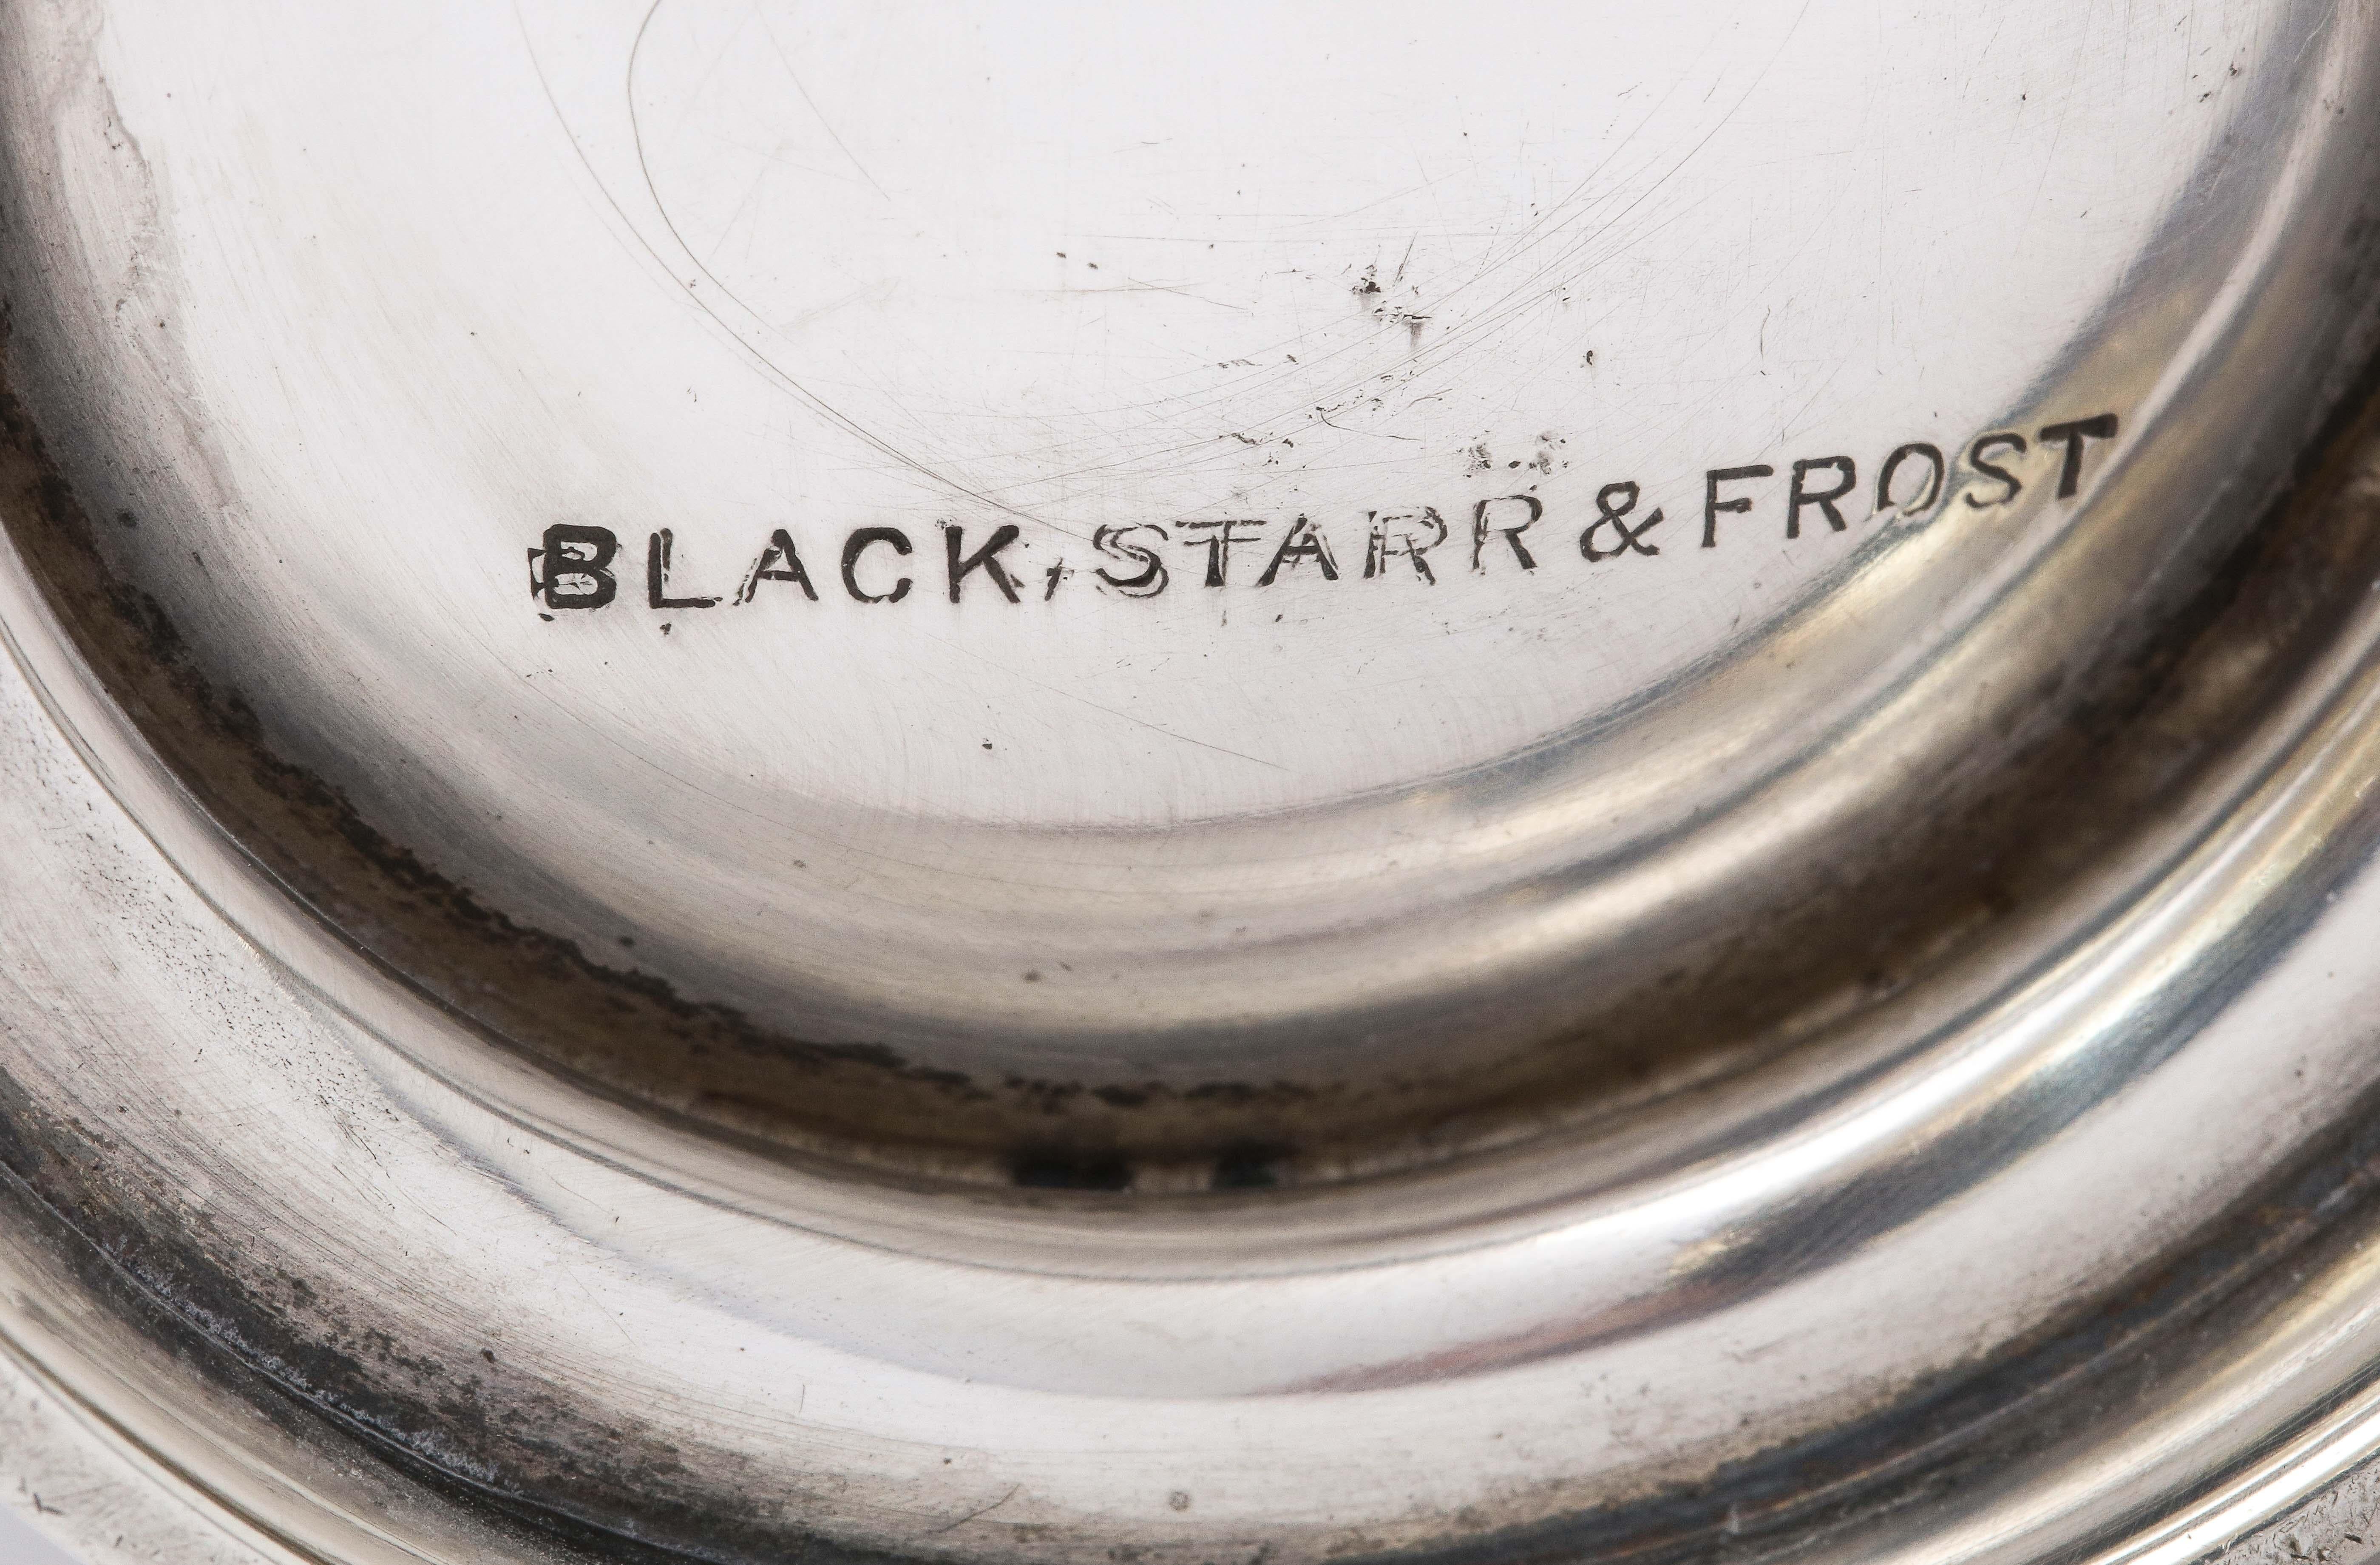 Victorian Period Sterling Silver Mug/Cup on Pedestal Base, Black, Starr & Frost For Sale 7